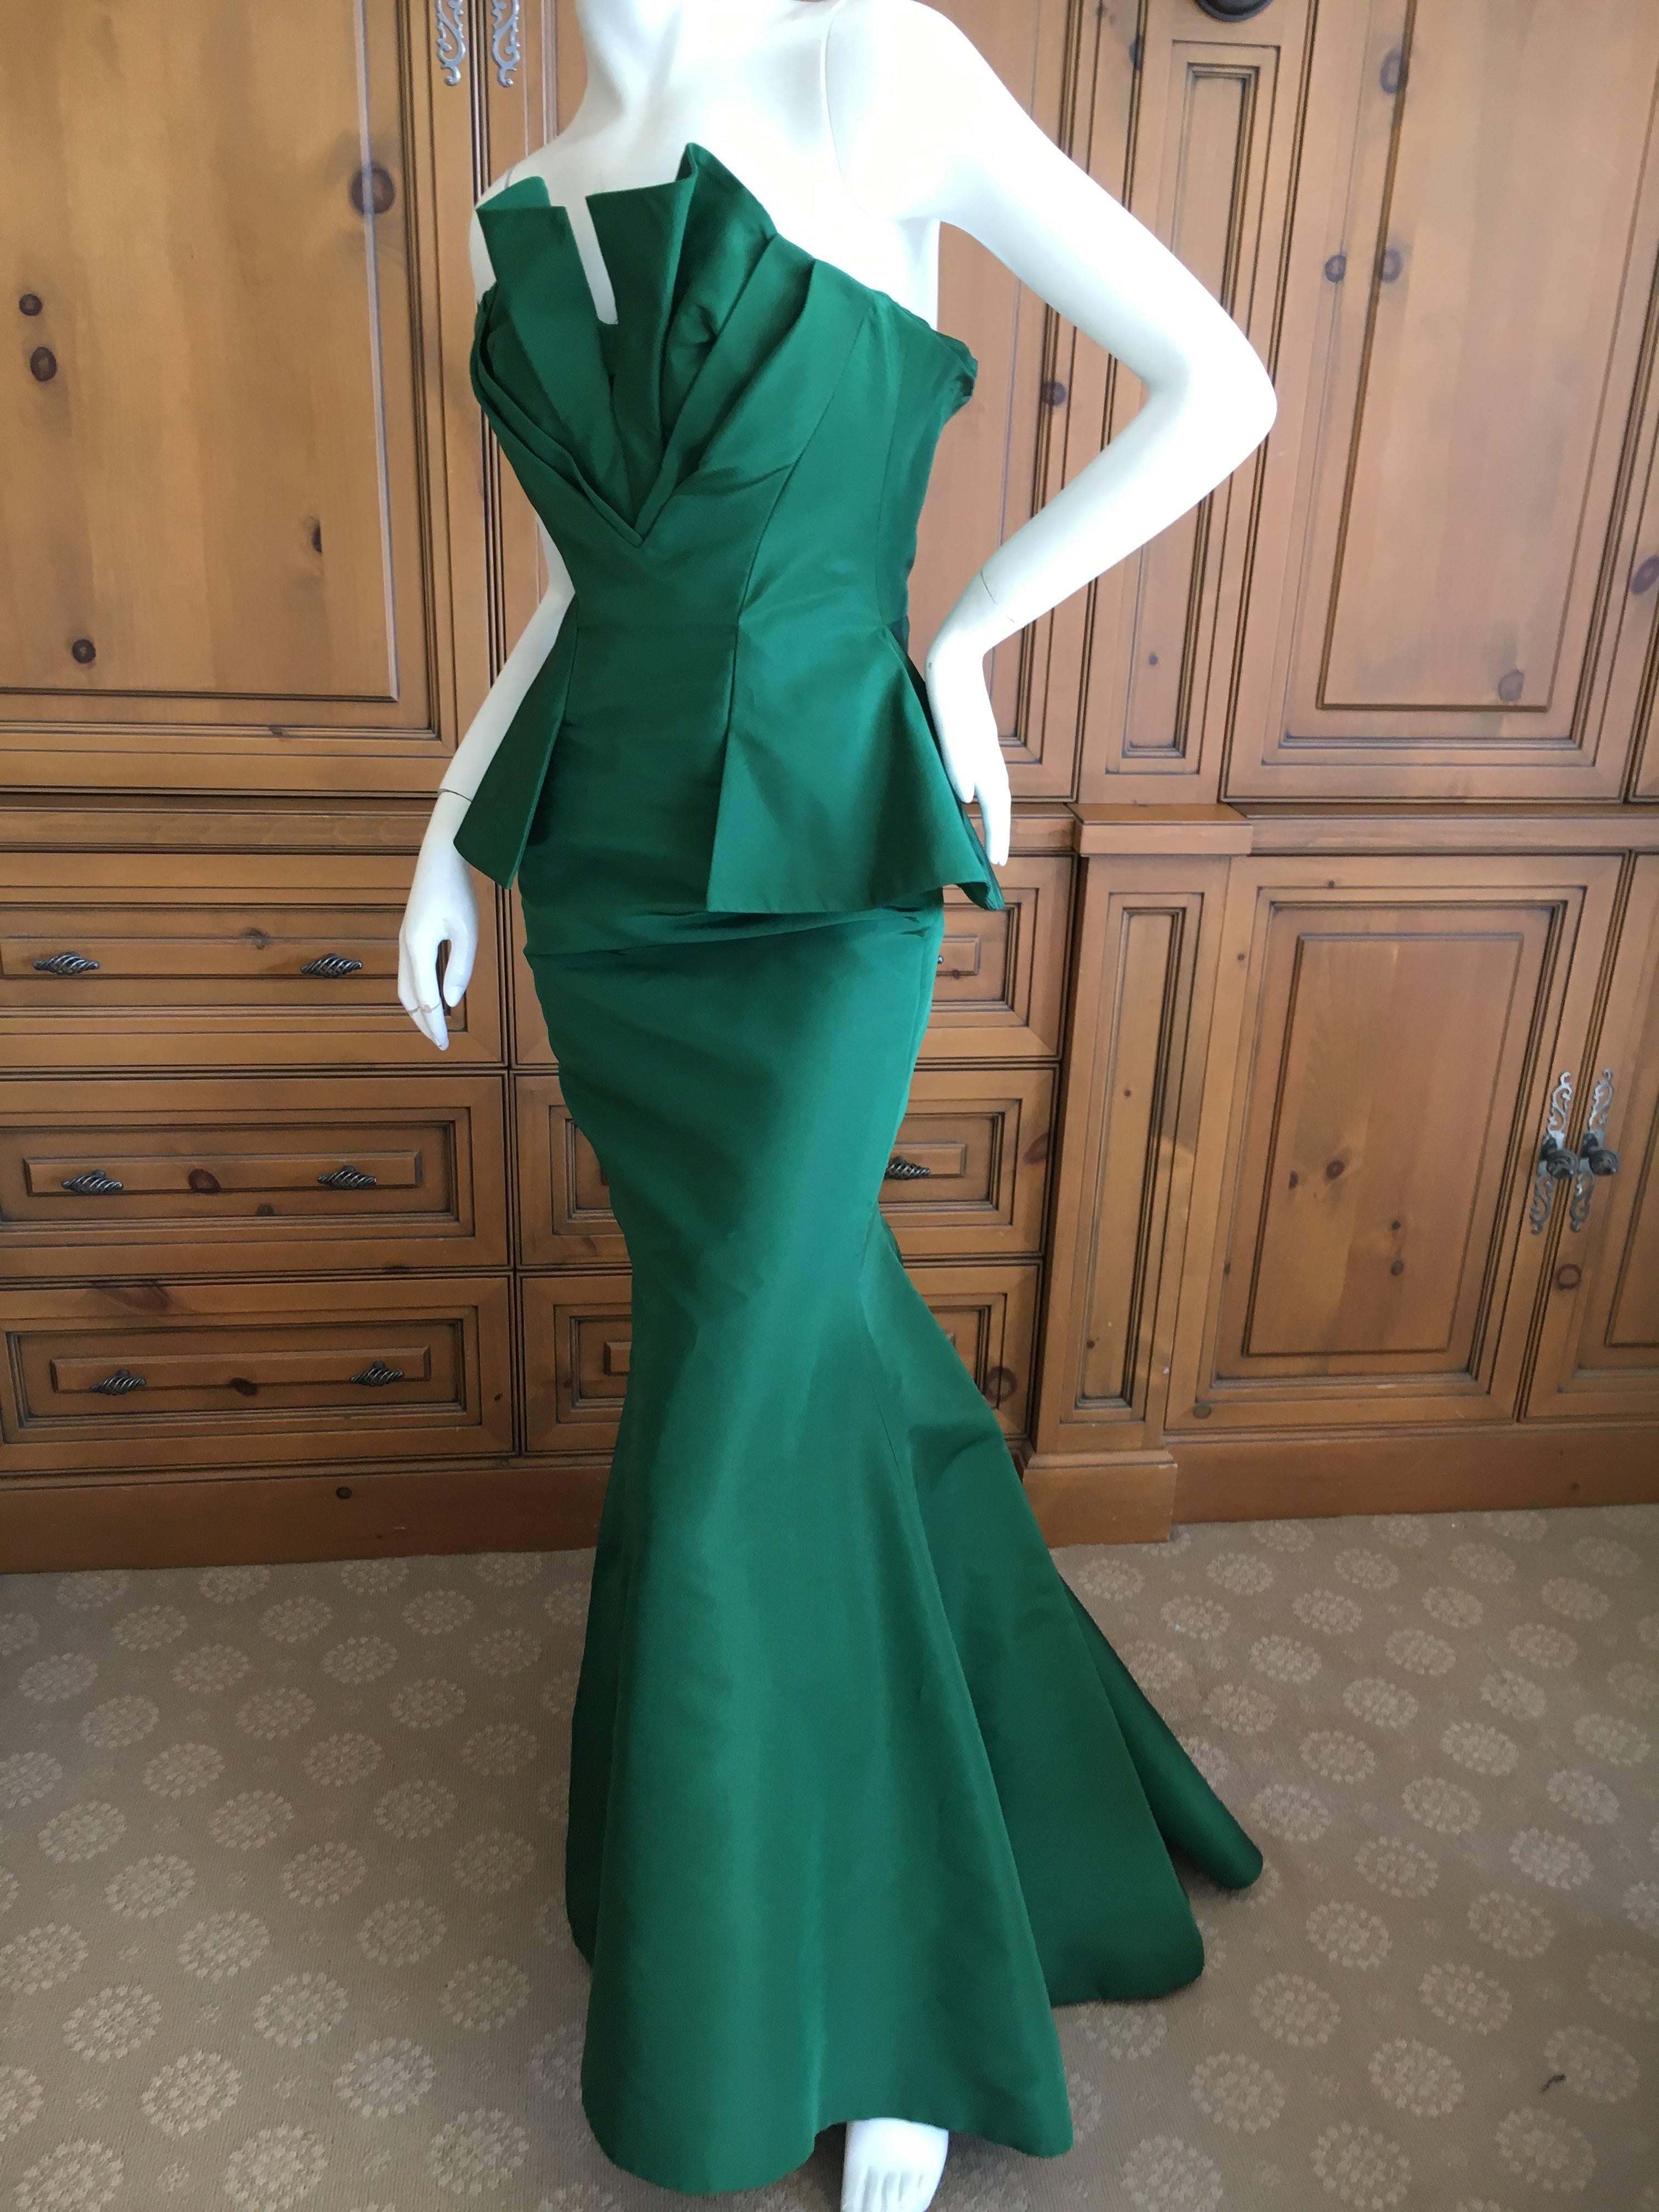 Oscar de la Renta Emerald Green Taffeta Mermaid Gown.
This is so pretty with a heart shape folded treatment at bust with a full mermaid skirt that billows out from the hips.
Bust 34"
Waist 25"
Hips 39"
Length 55
Excellent conditon